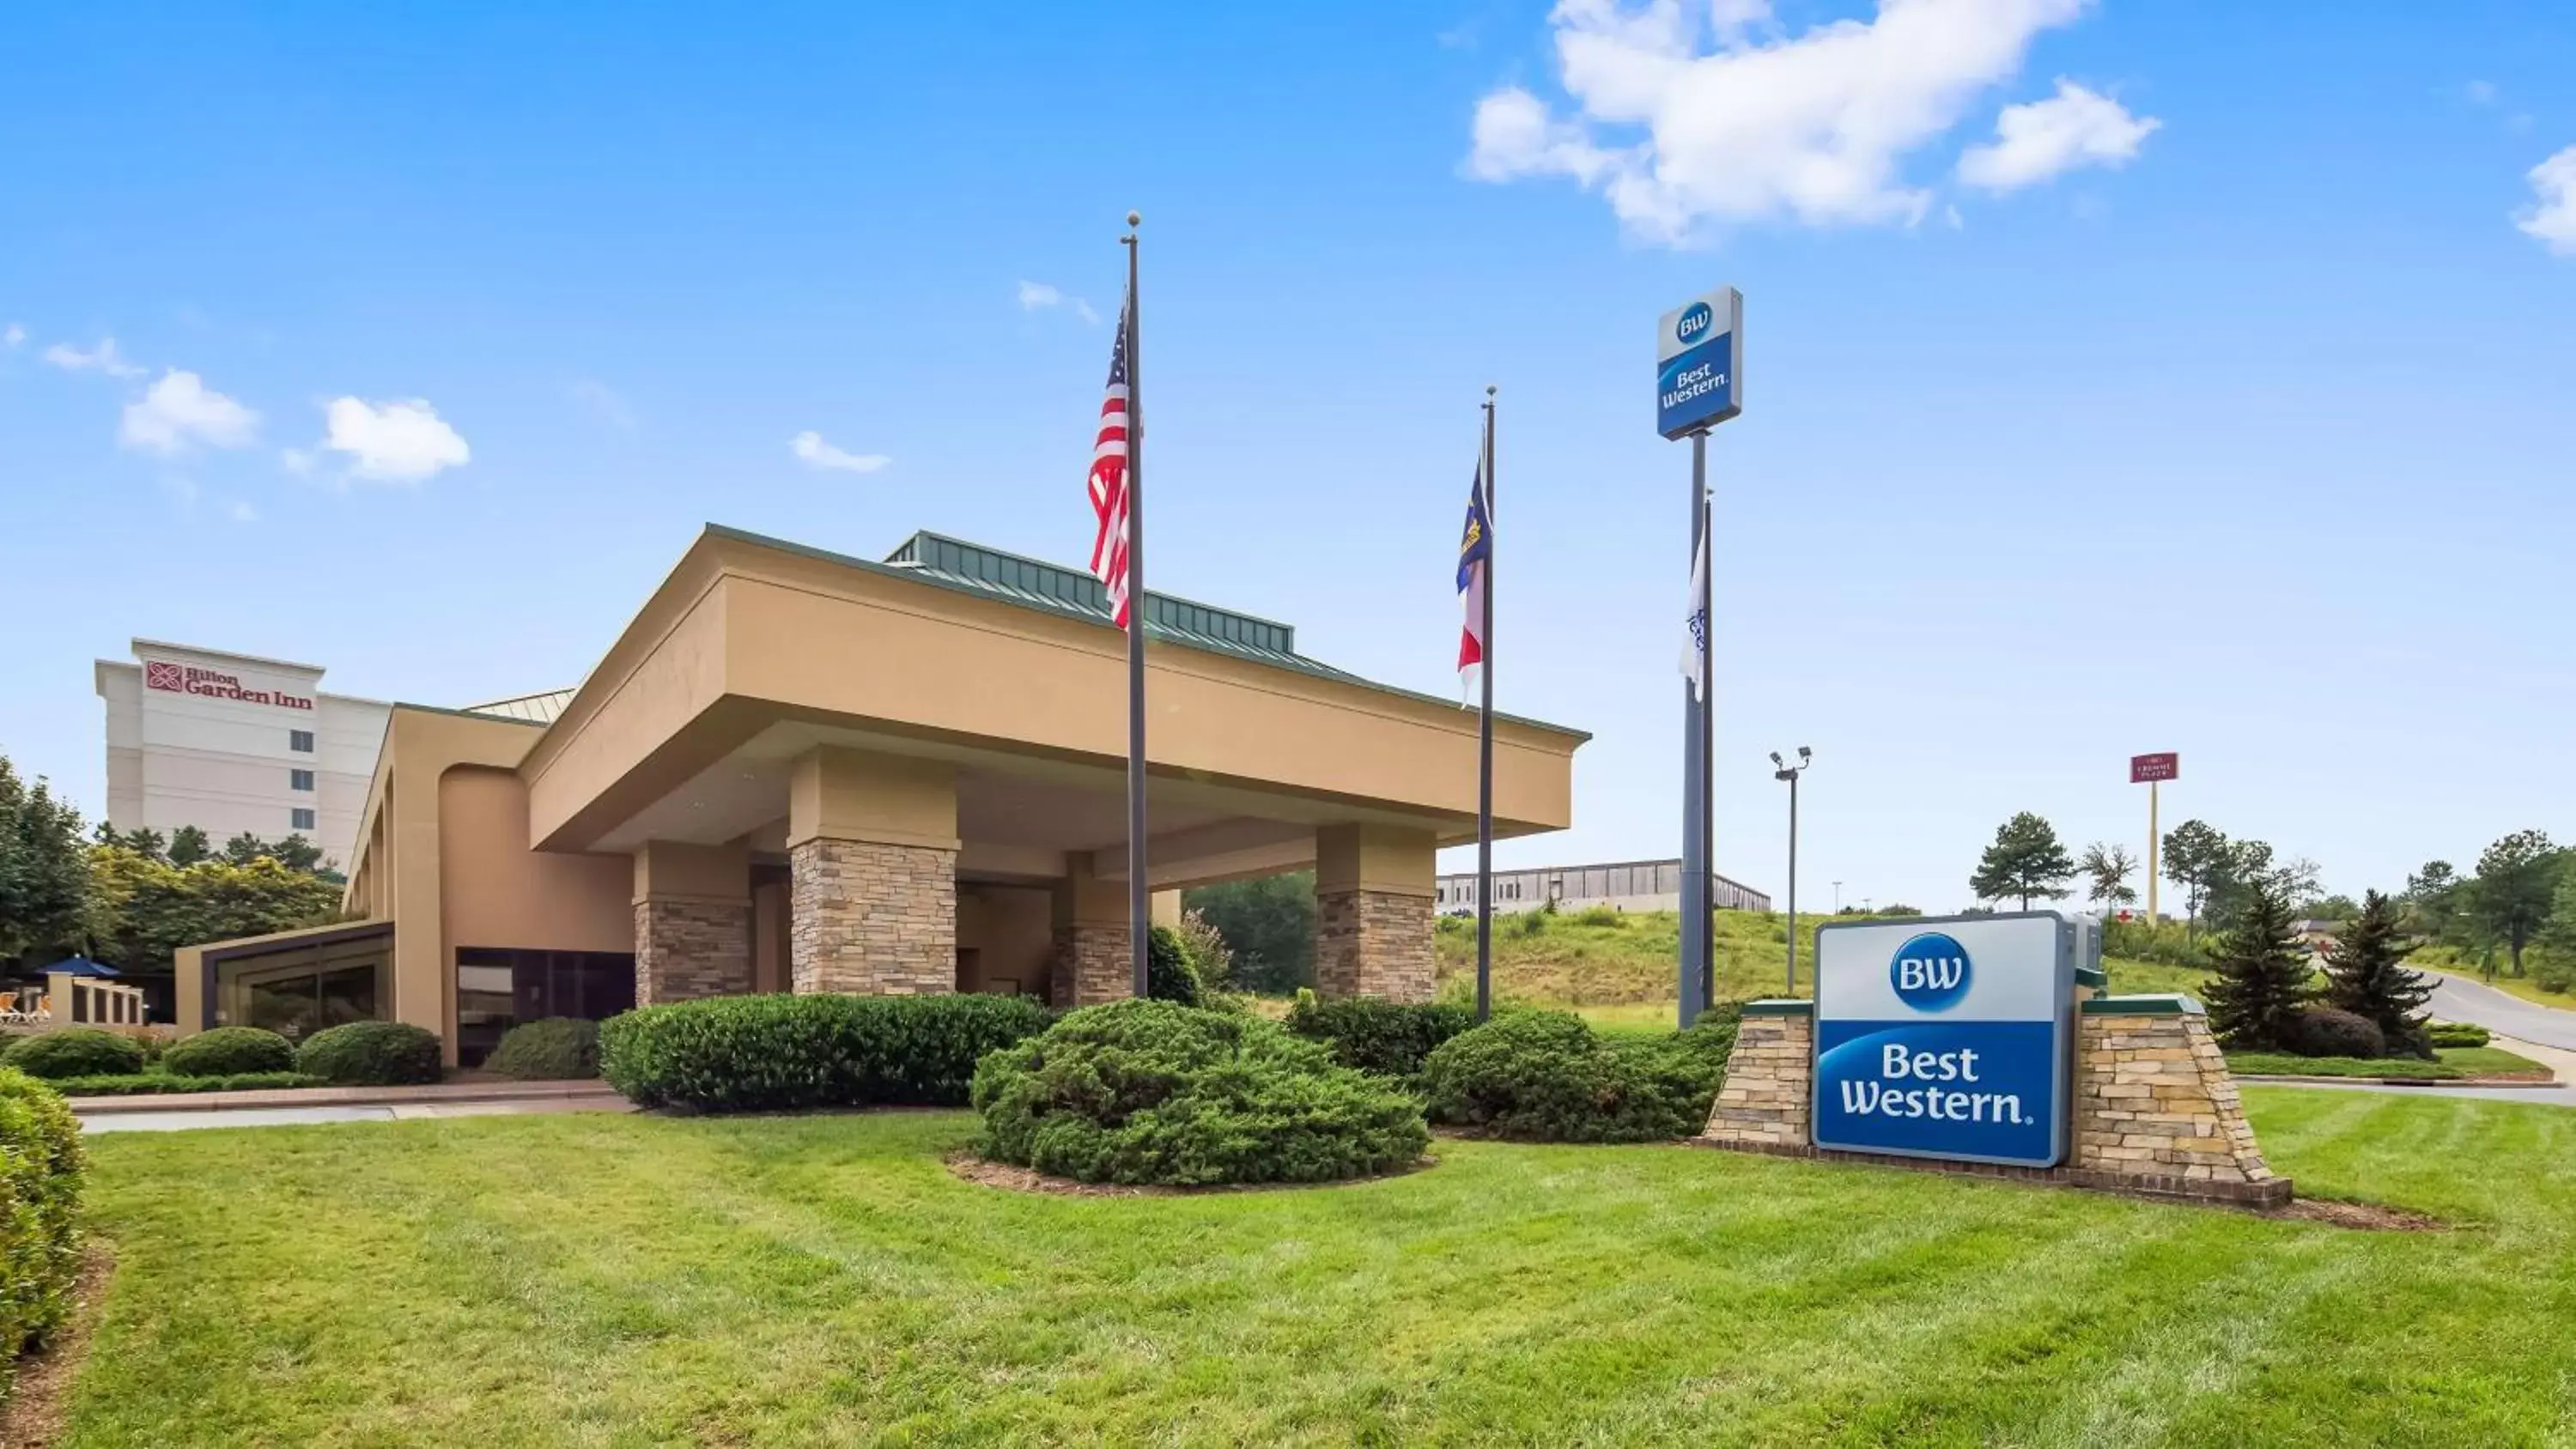 Property building in Best Western Hickory